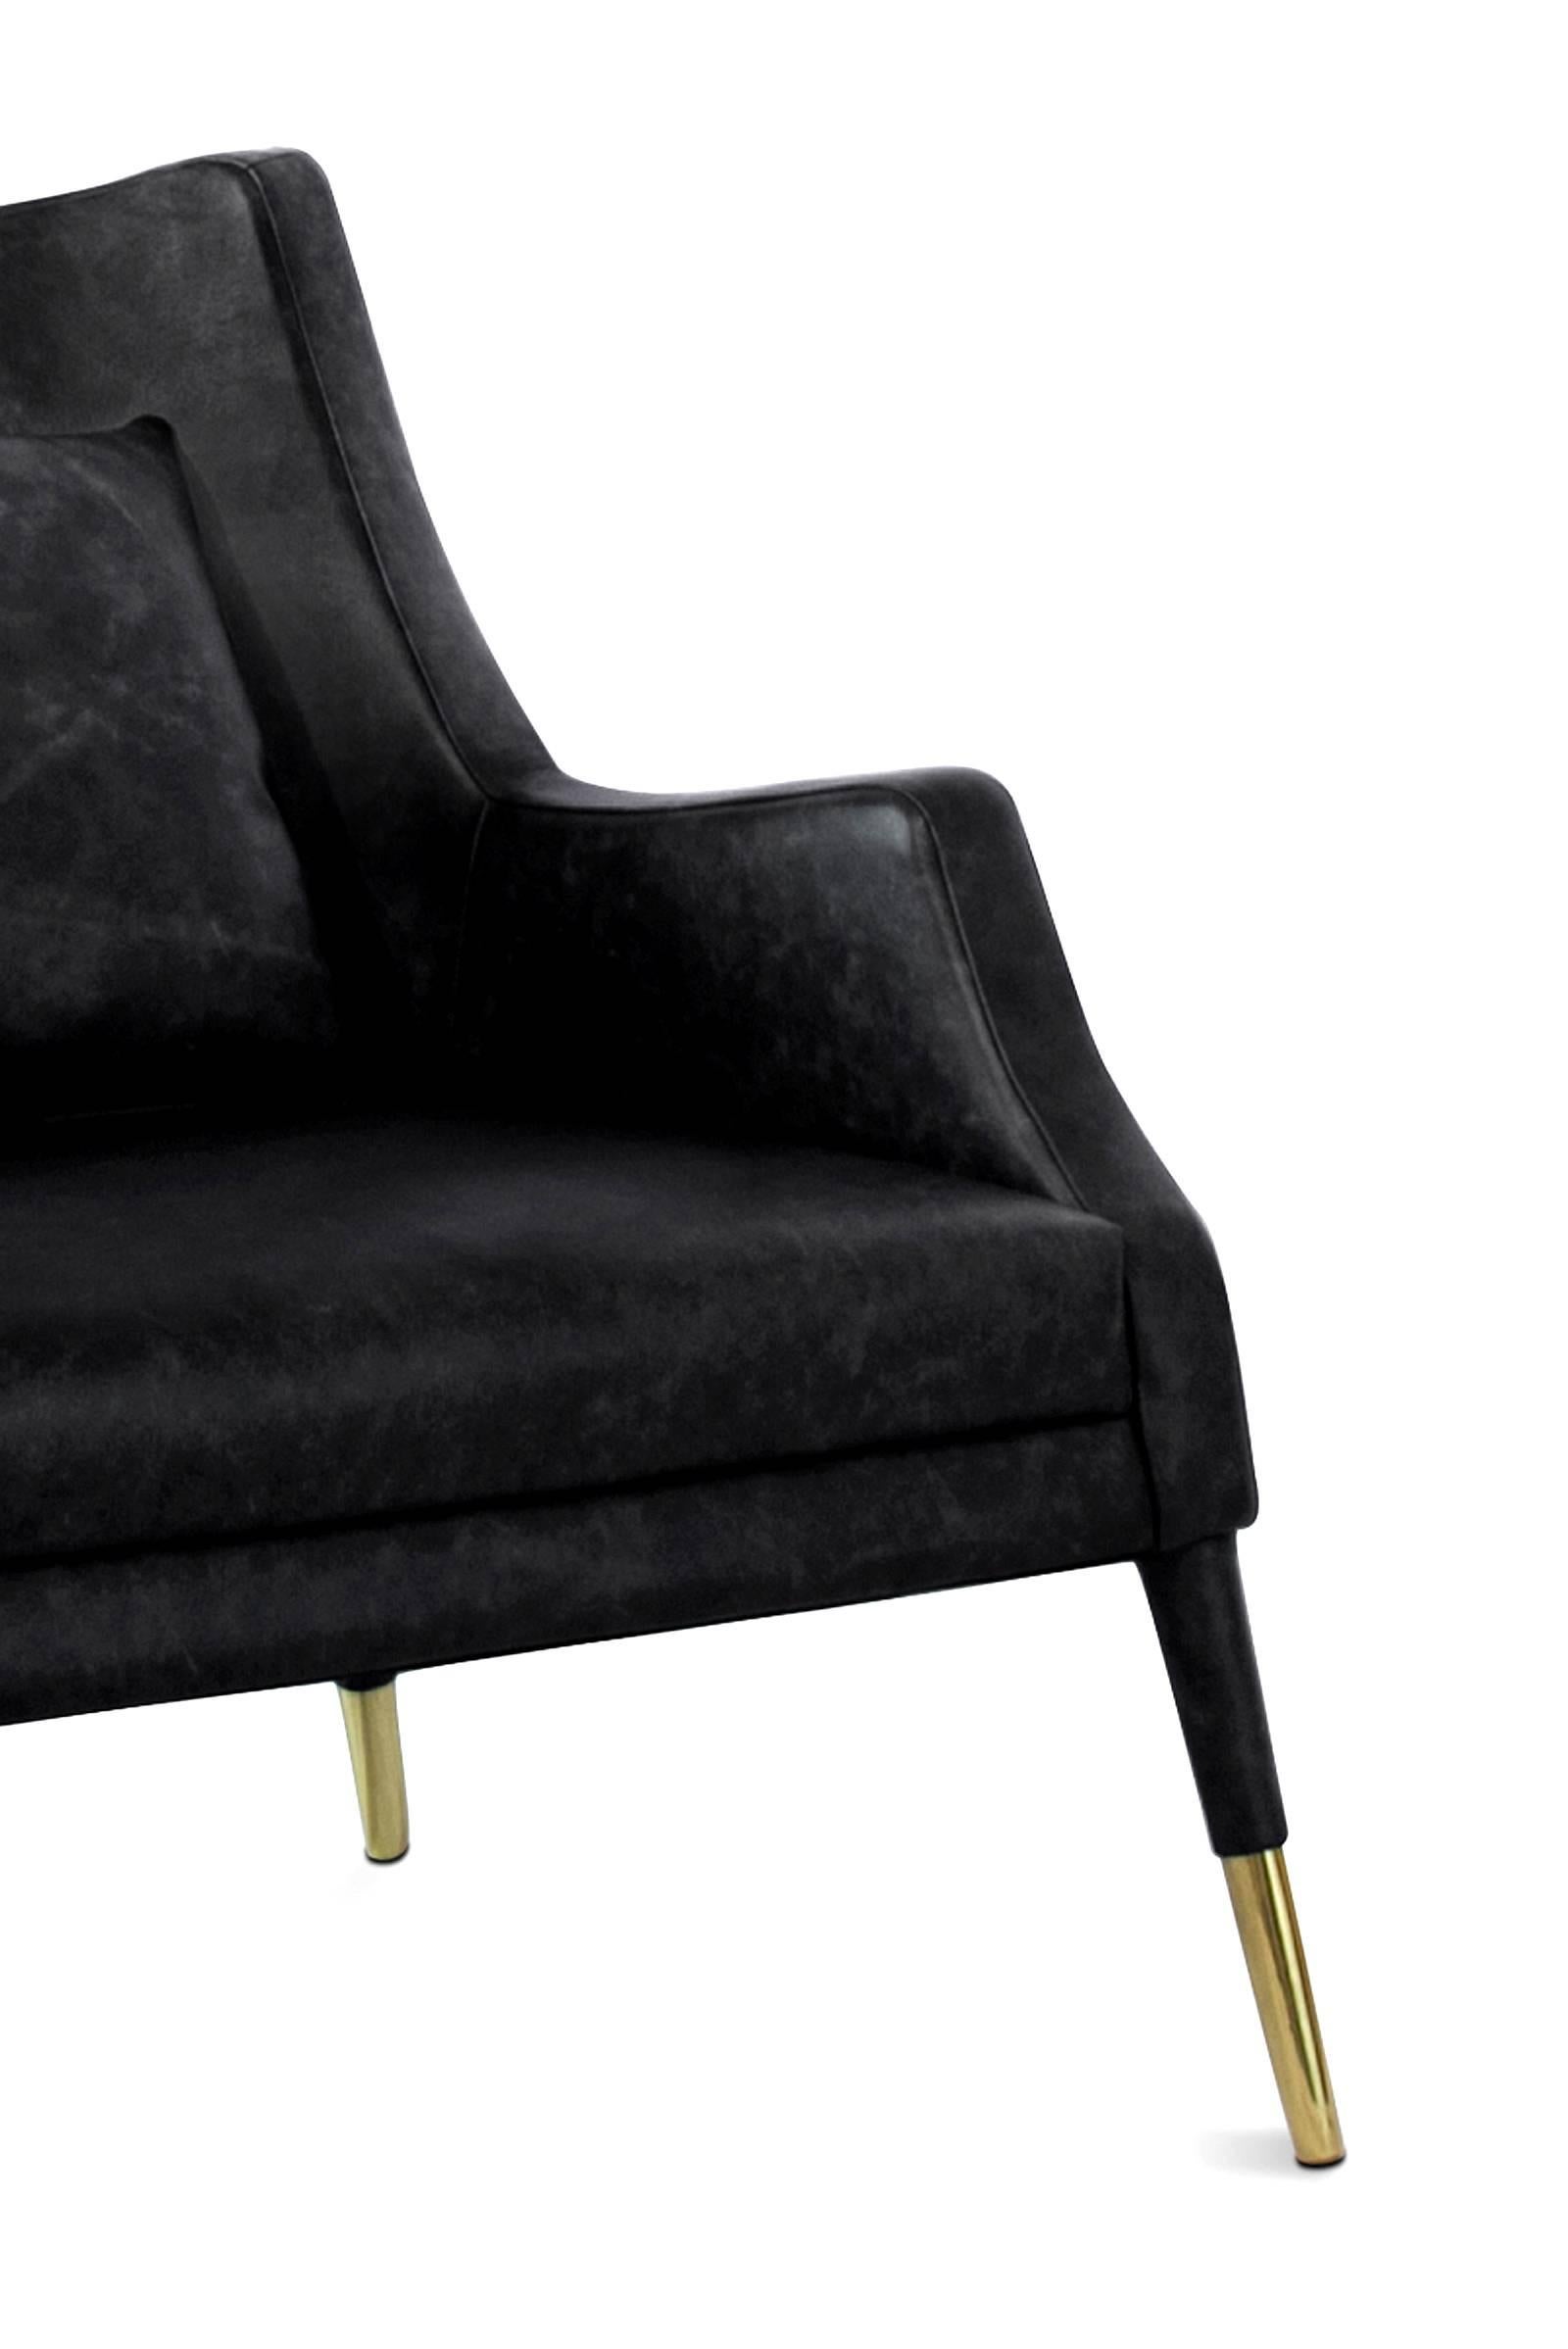 Contemporary Black Lounge Armchair For Sale